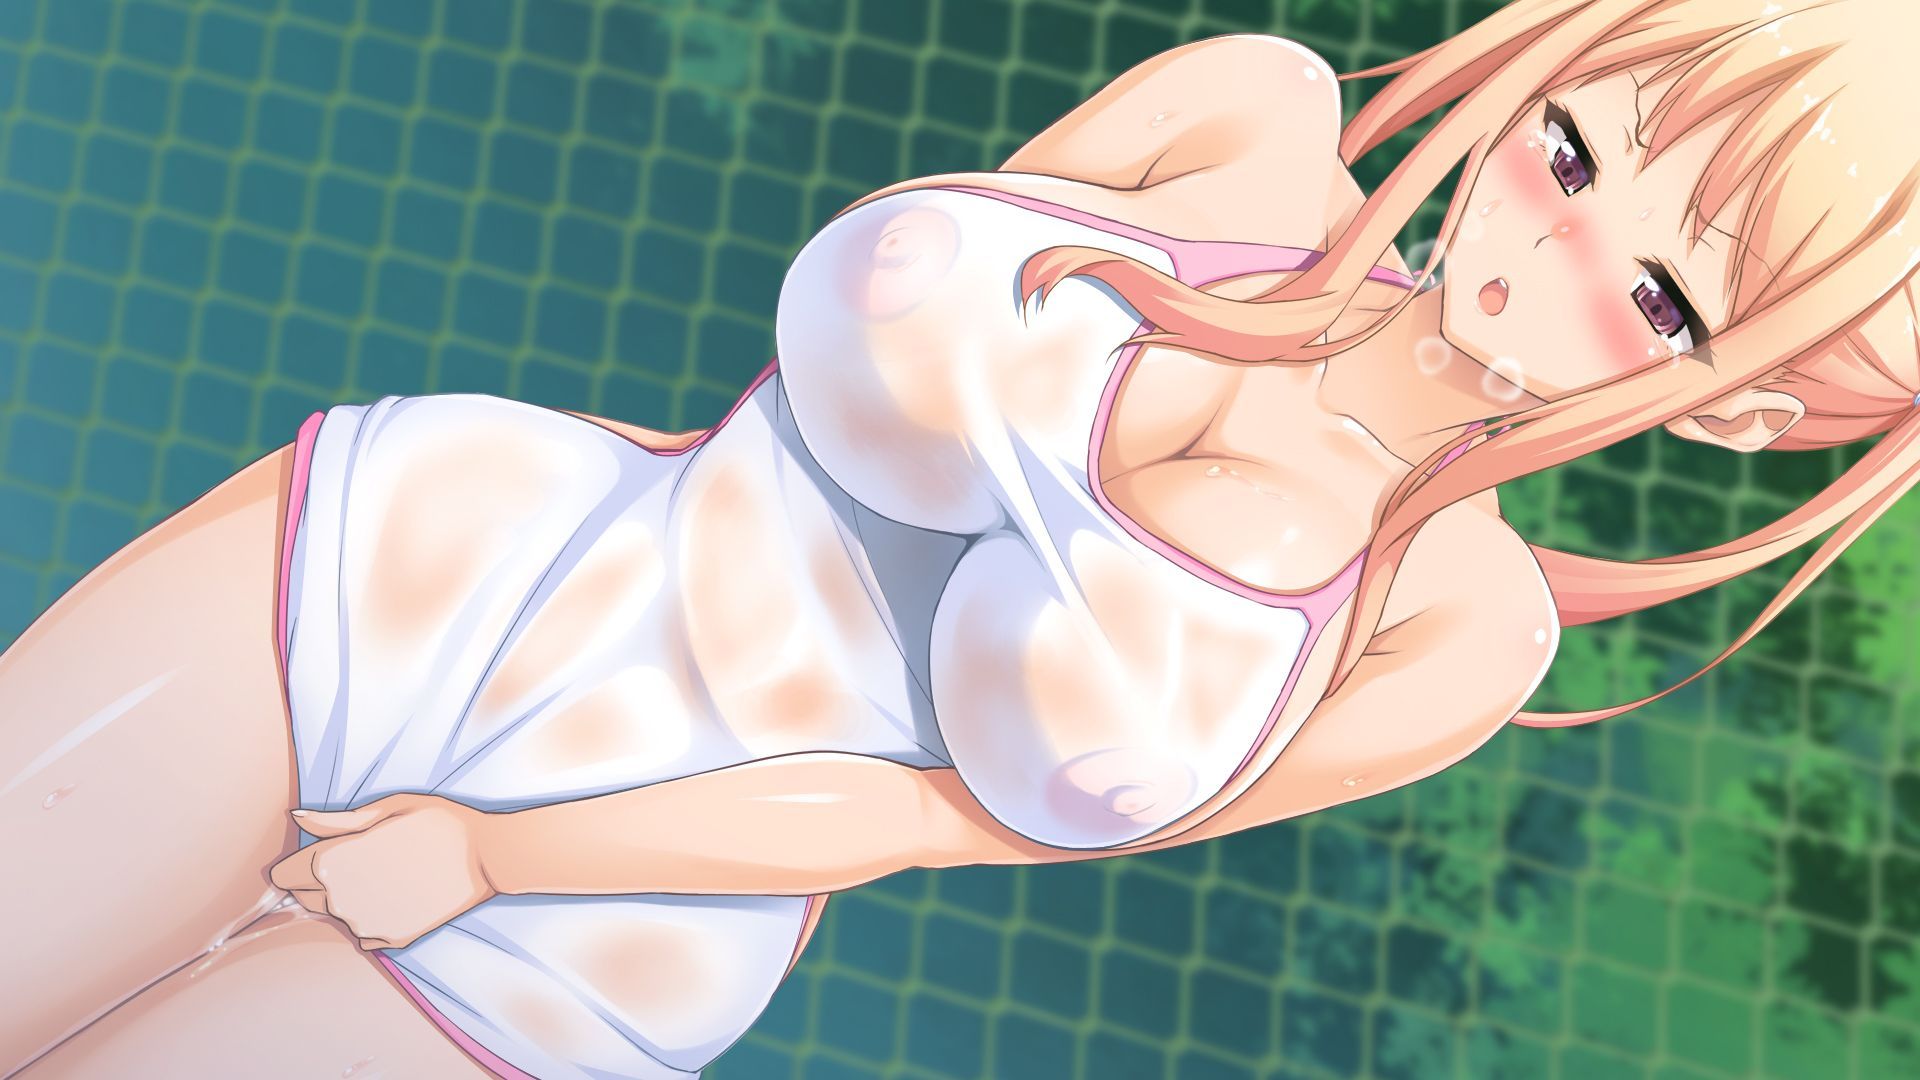 Erotic anime summary Lewd beautiful girls with small pink nipples in full view [secondary erotic] 12